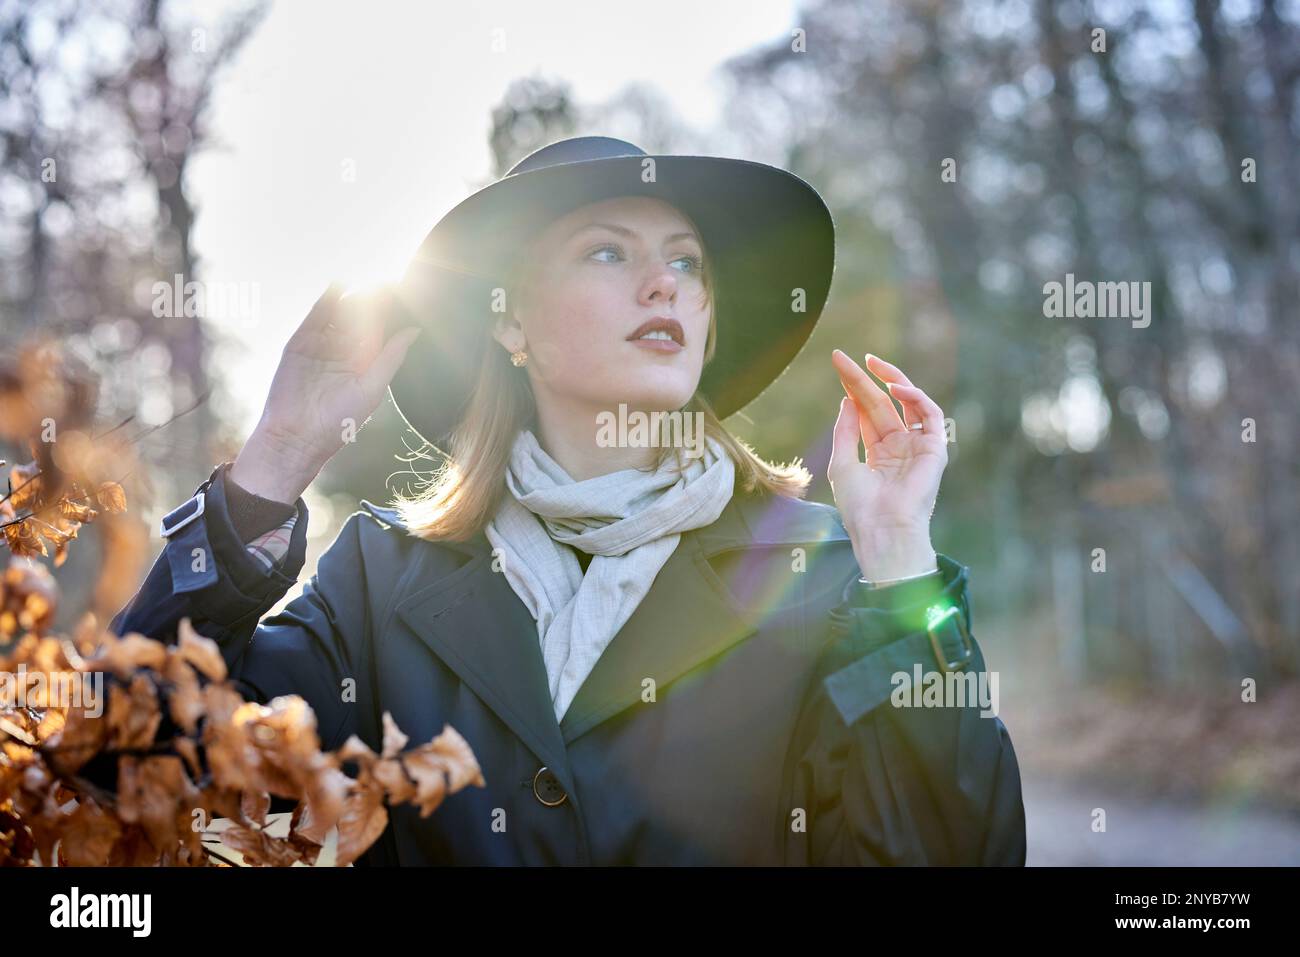 Young woman in forest with a hat and sunshine Stock Photo